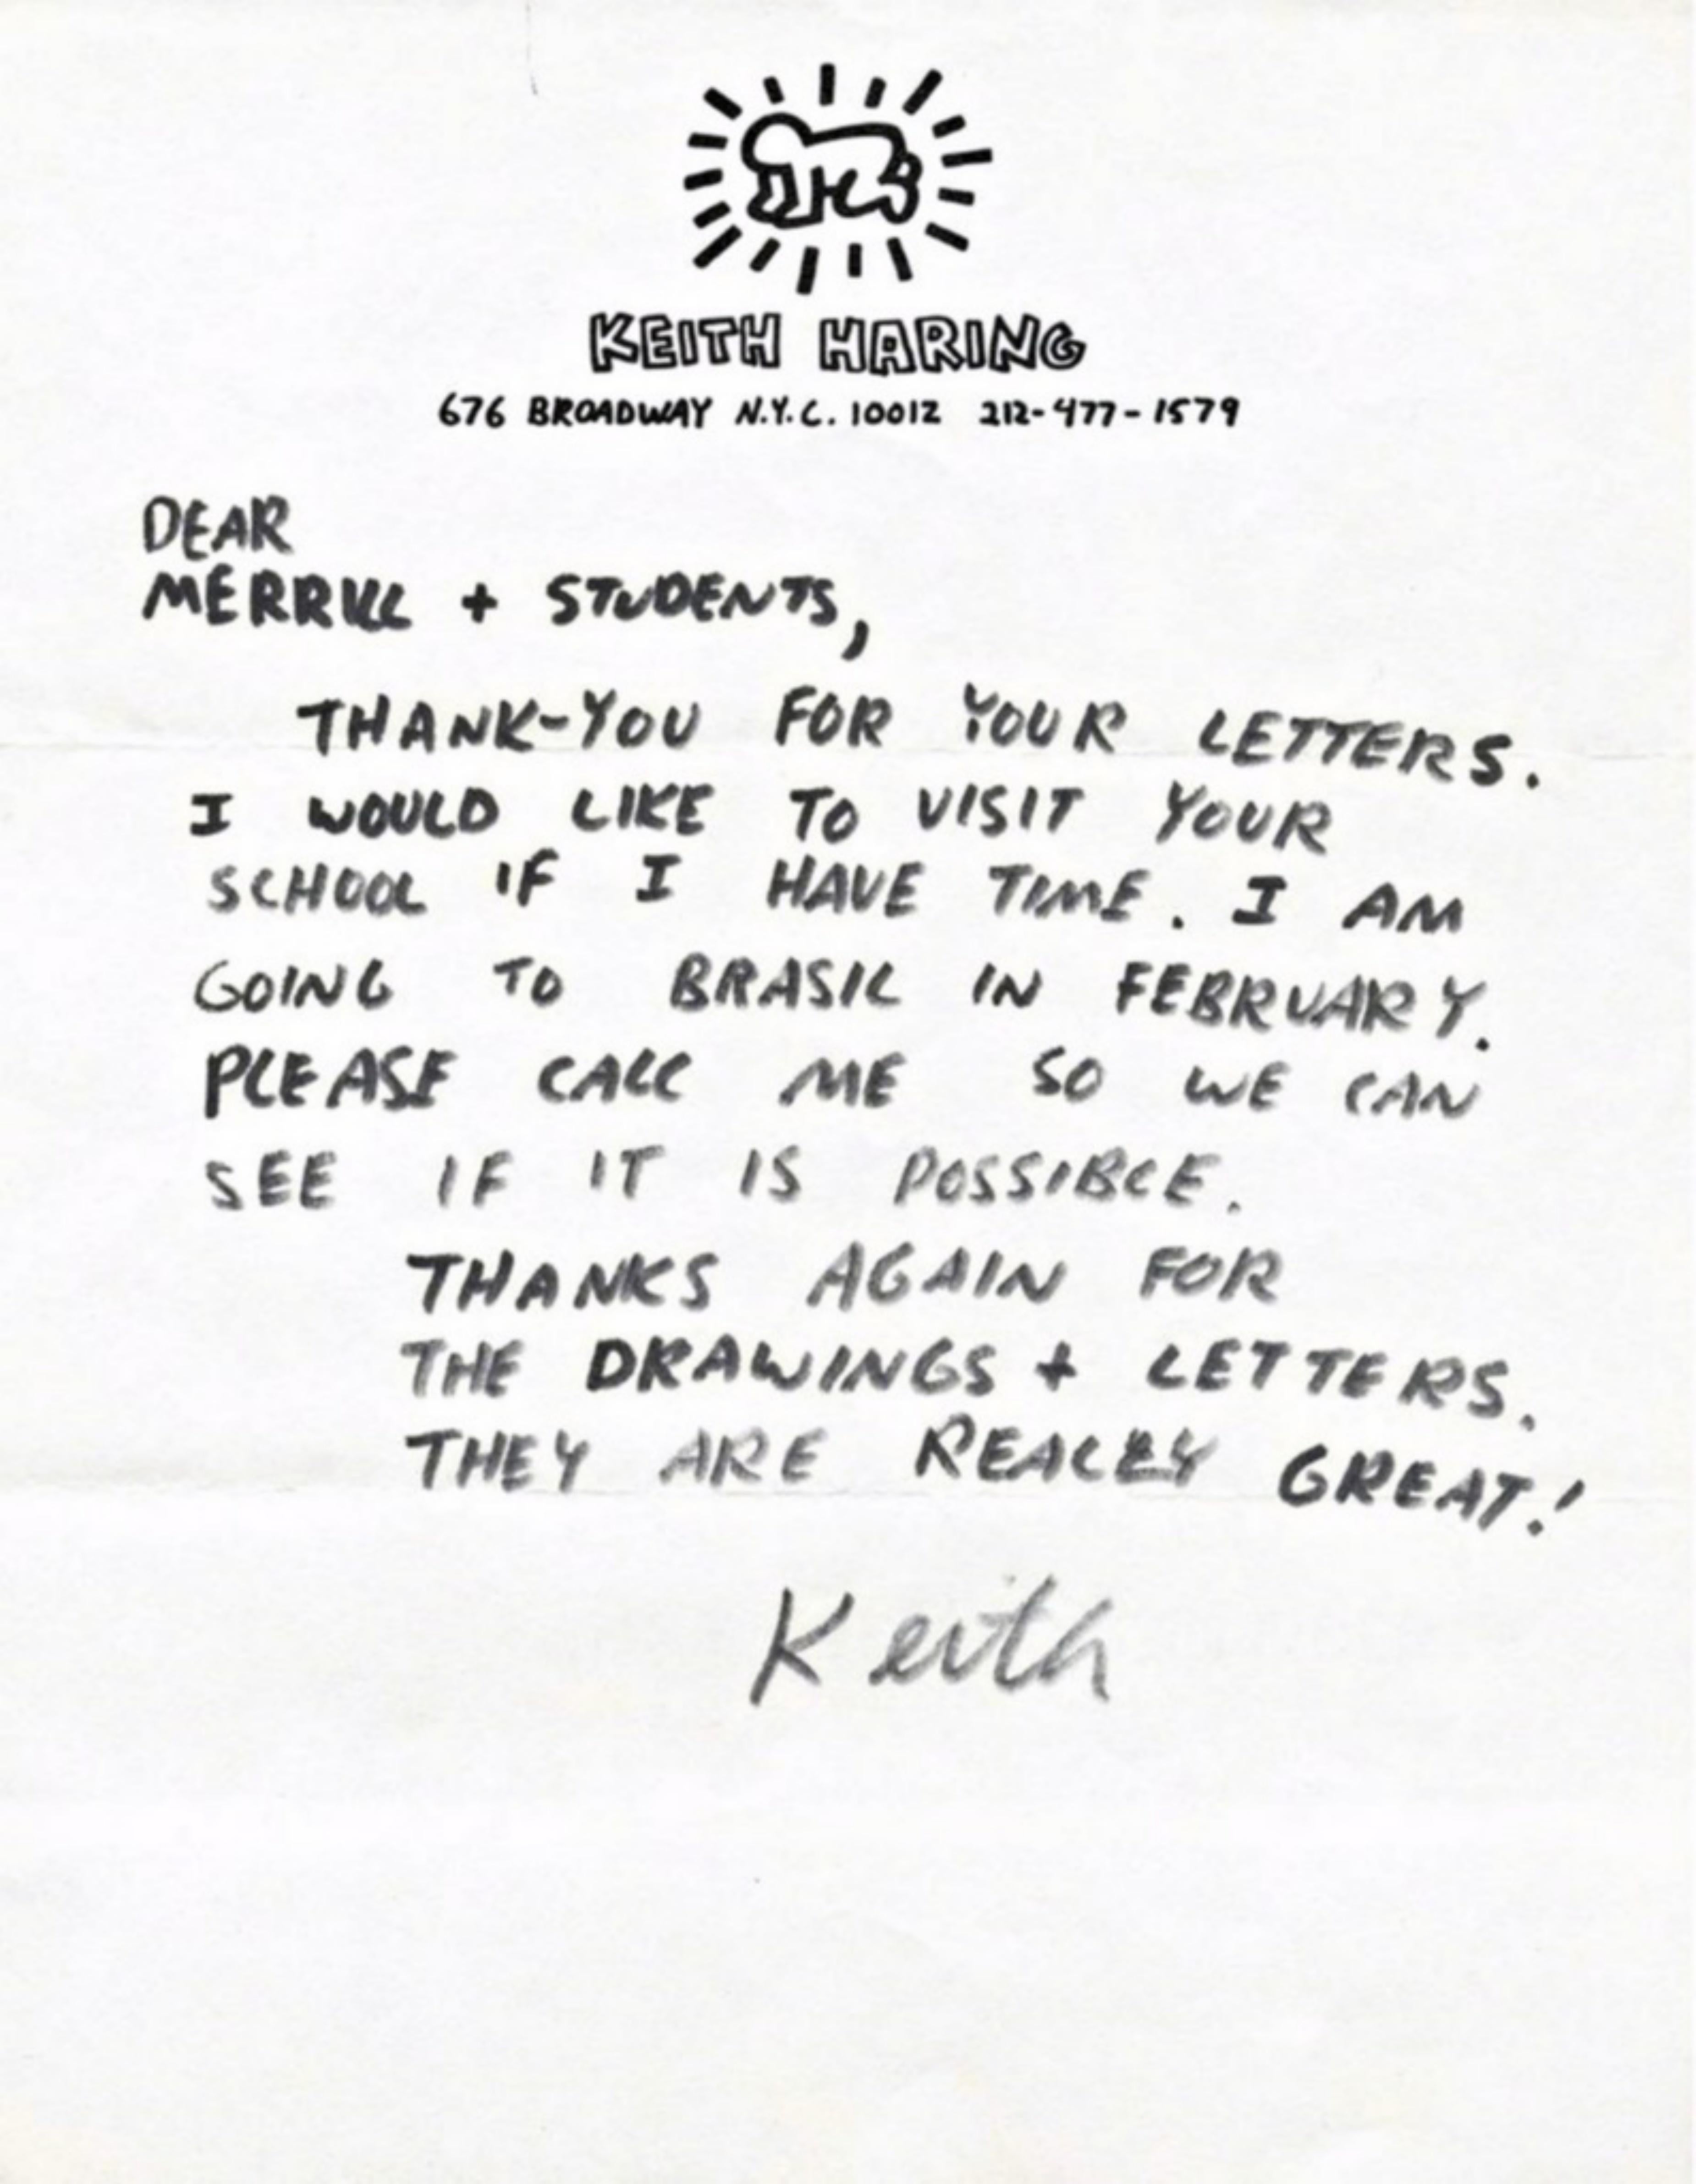 Original handwritten Letter of thanks, hand signed by Keith Haring on letterhead